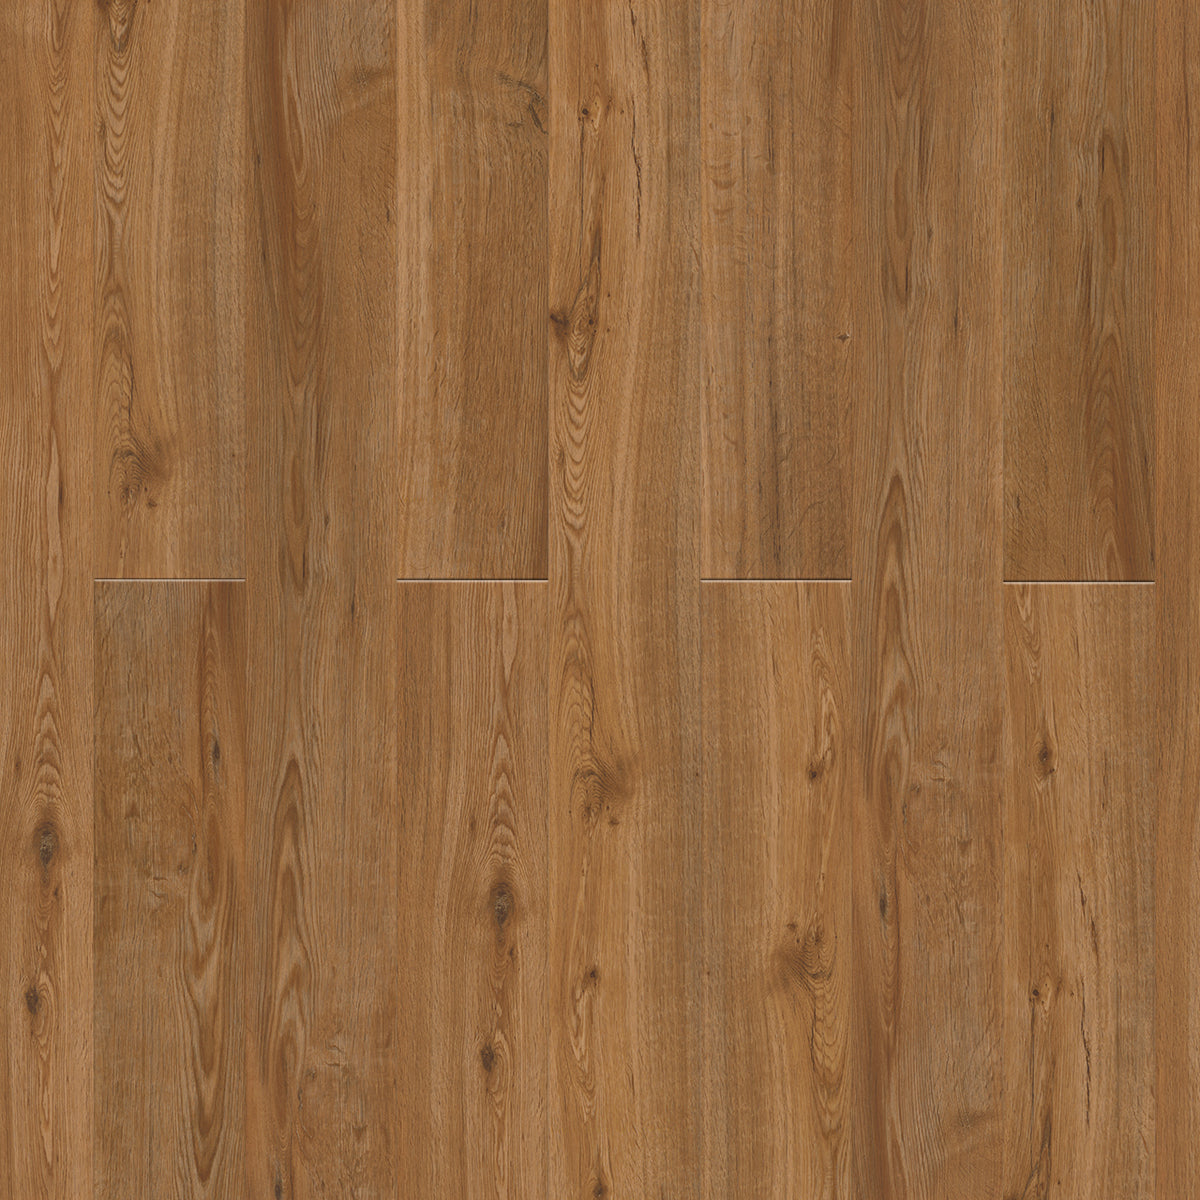 Engineered Floors - Triumph Collection - The New Standard II - 6 in. x 48 in. - Beachcomber